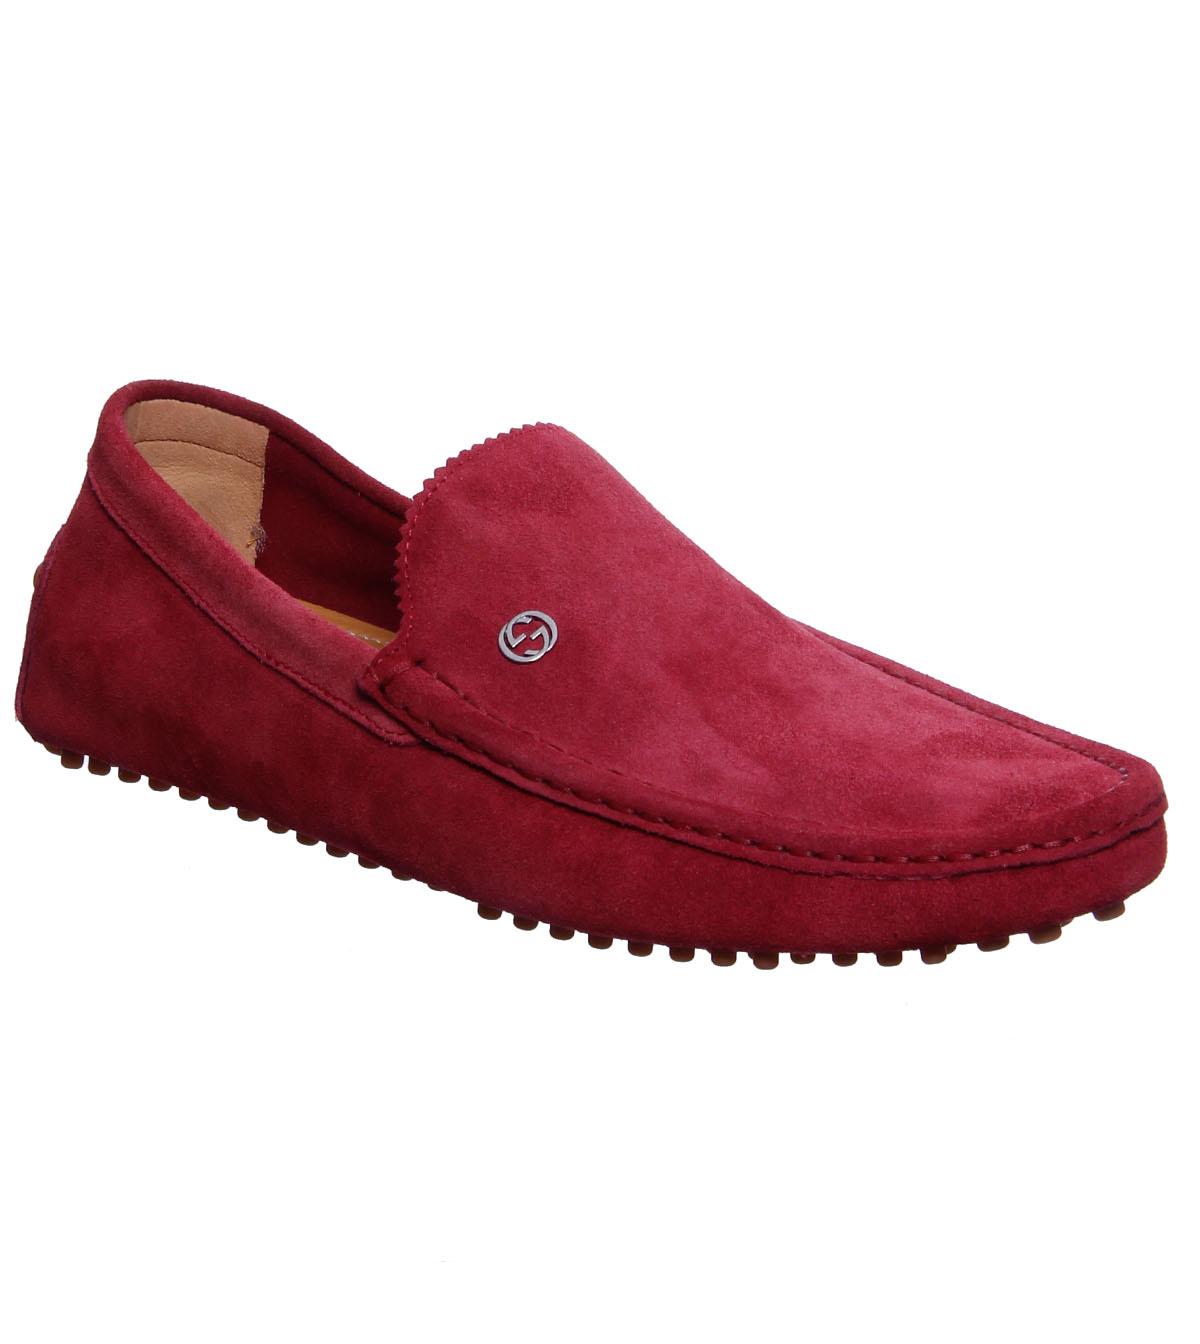 Foto Gucci Cherry Red Suede Driving Shoe